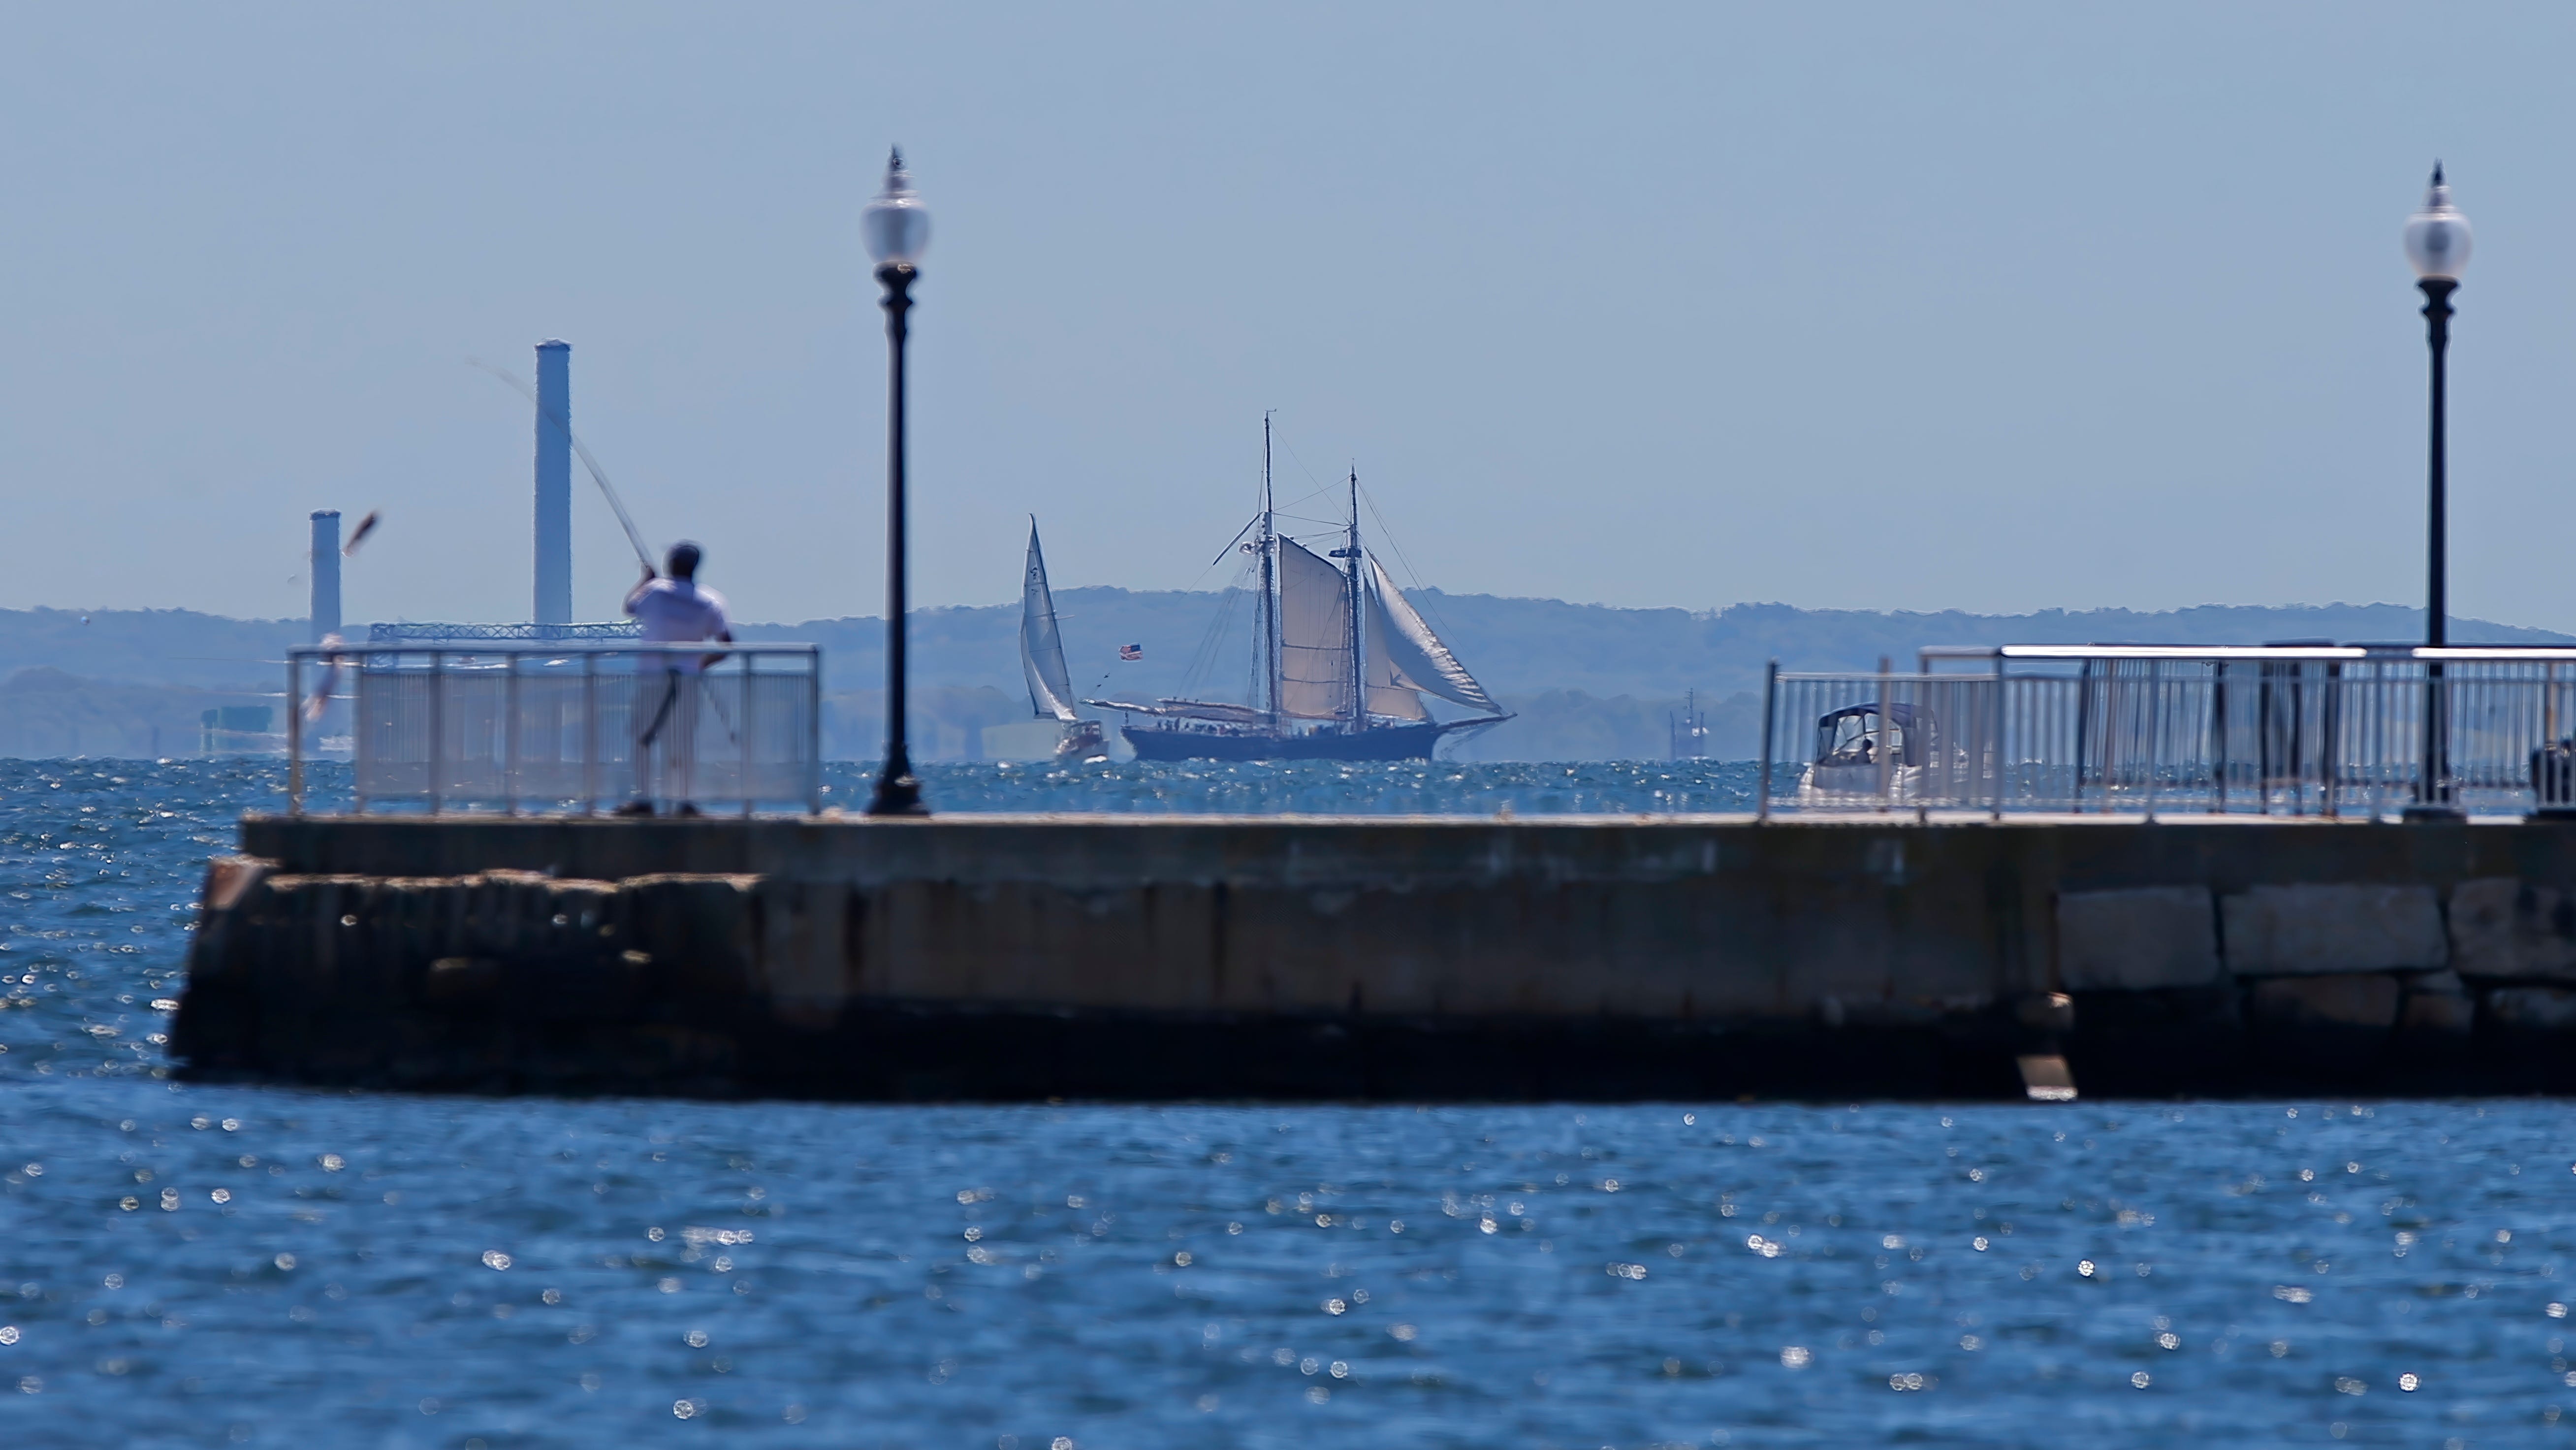 The Ernestina-Morrissey has set sail from New Bedford once again